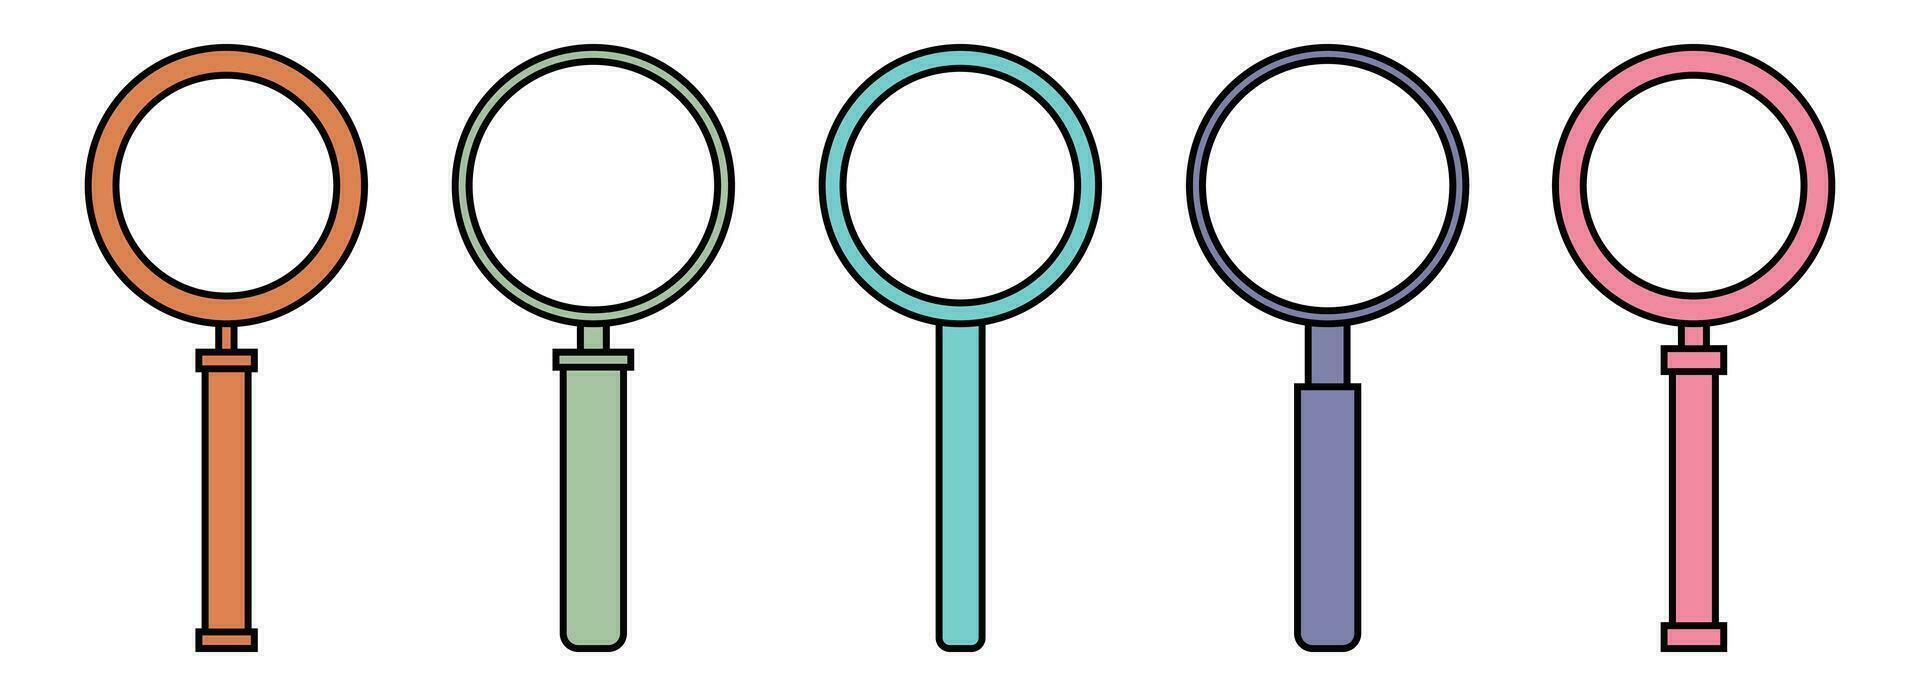 Magnifying glass icon set vector illustration